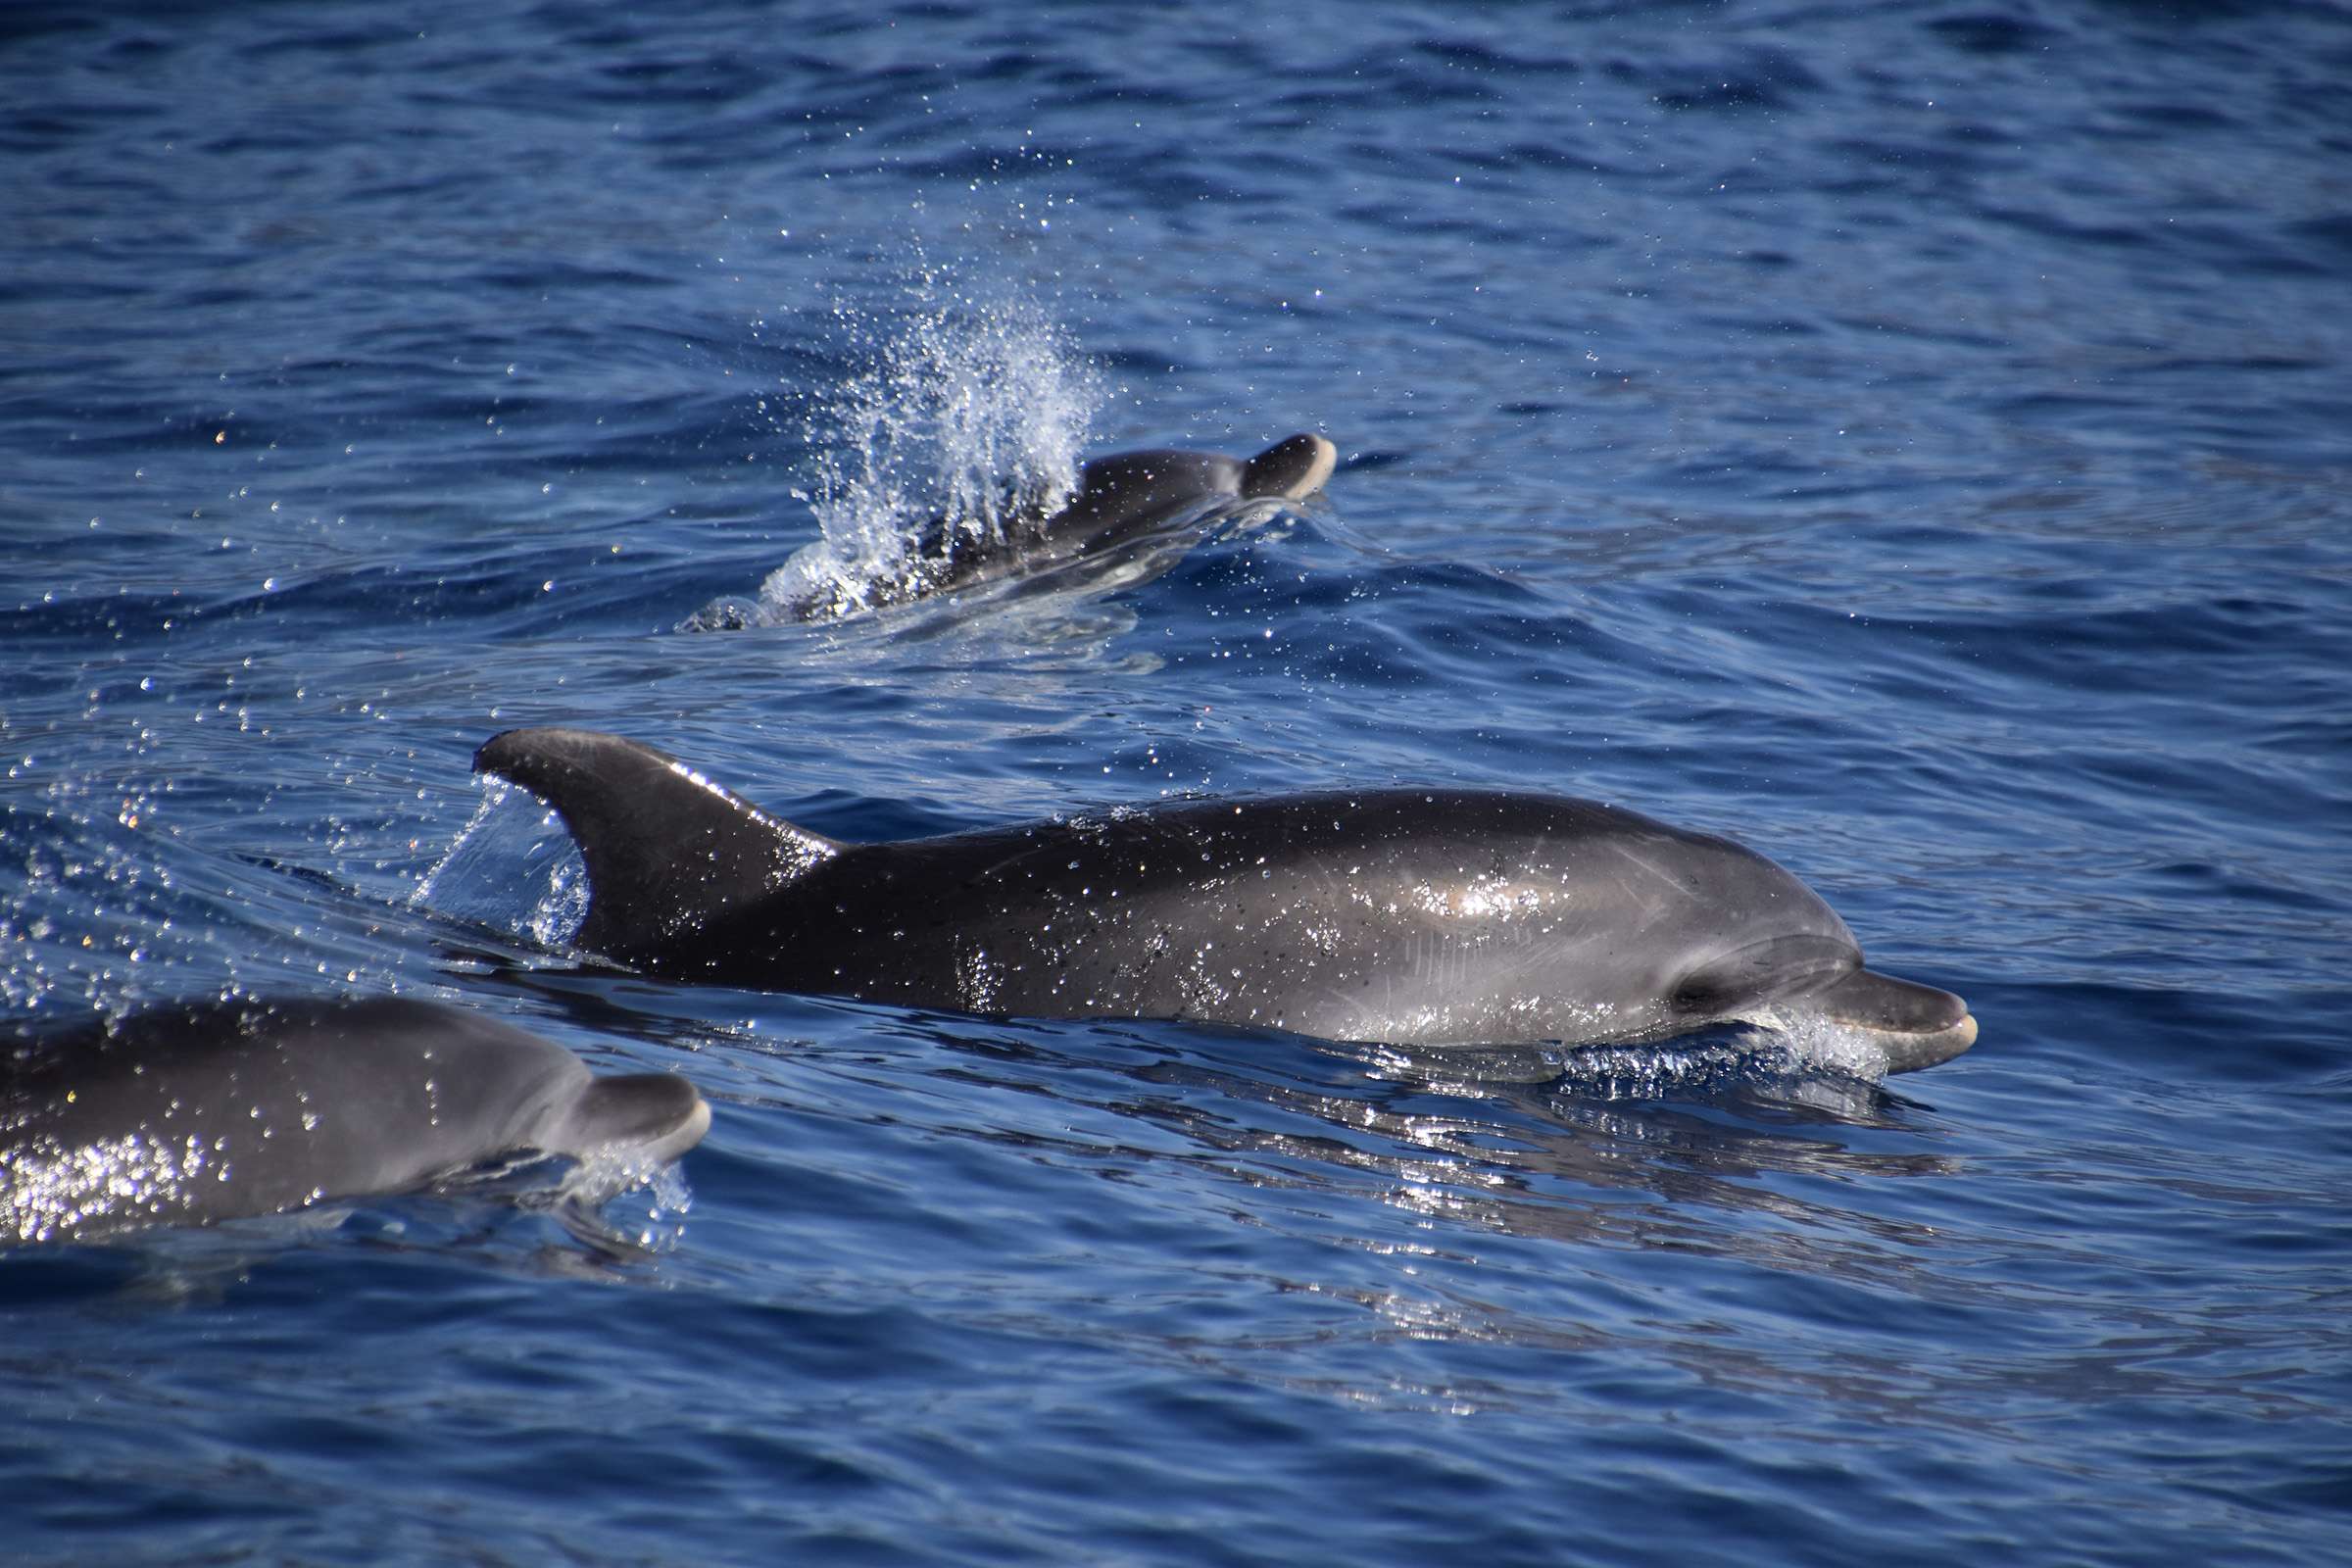 Photograph of a group of dolphins swimming in Tenerife by Shelltone Whale Project